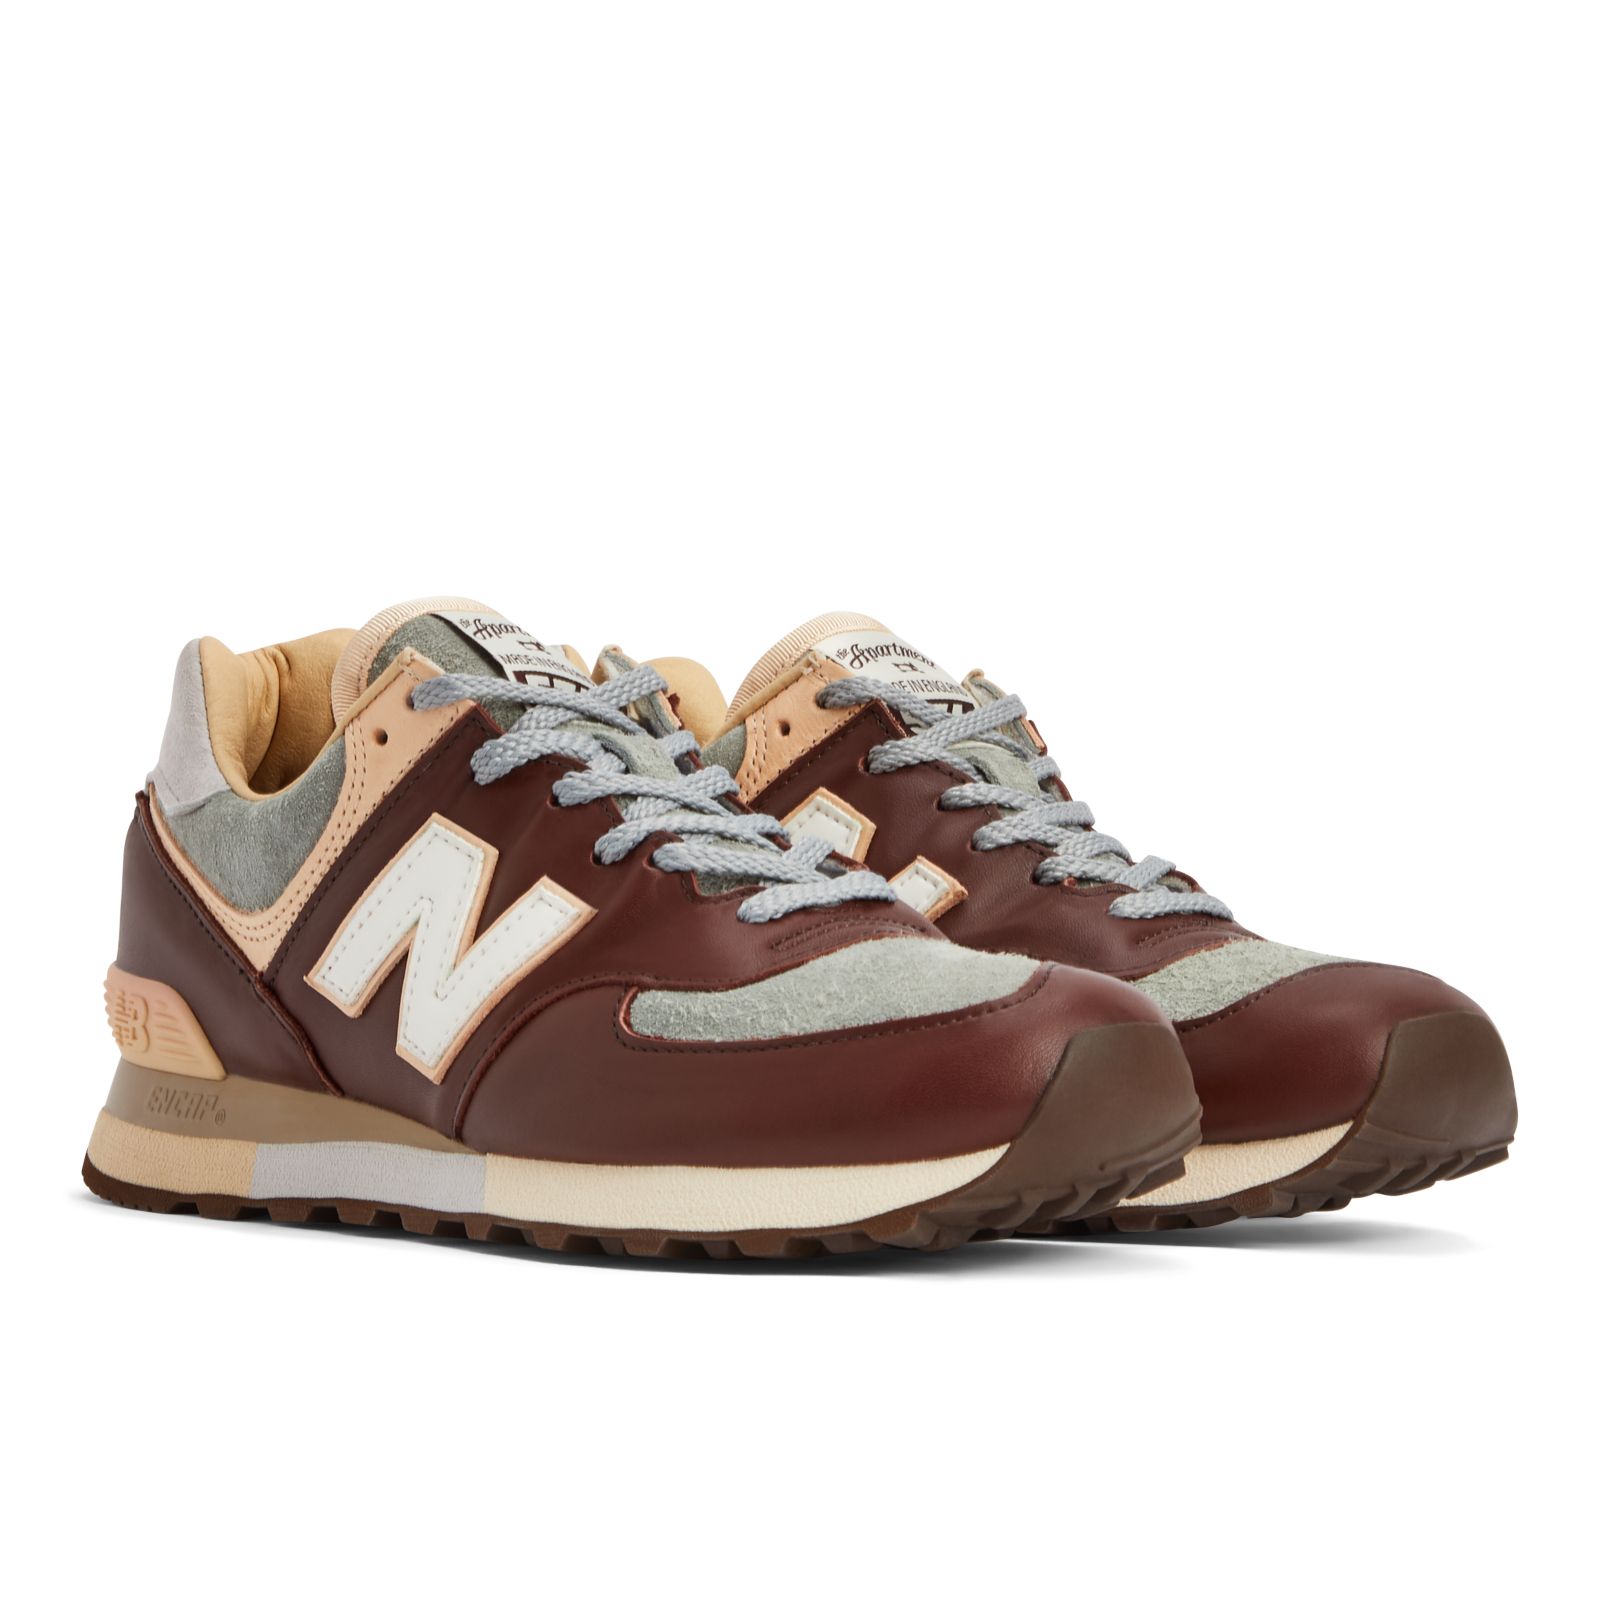 The Apartment x New Balance MADE in UK 576 - New Balance